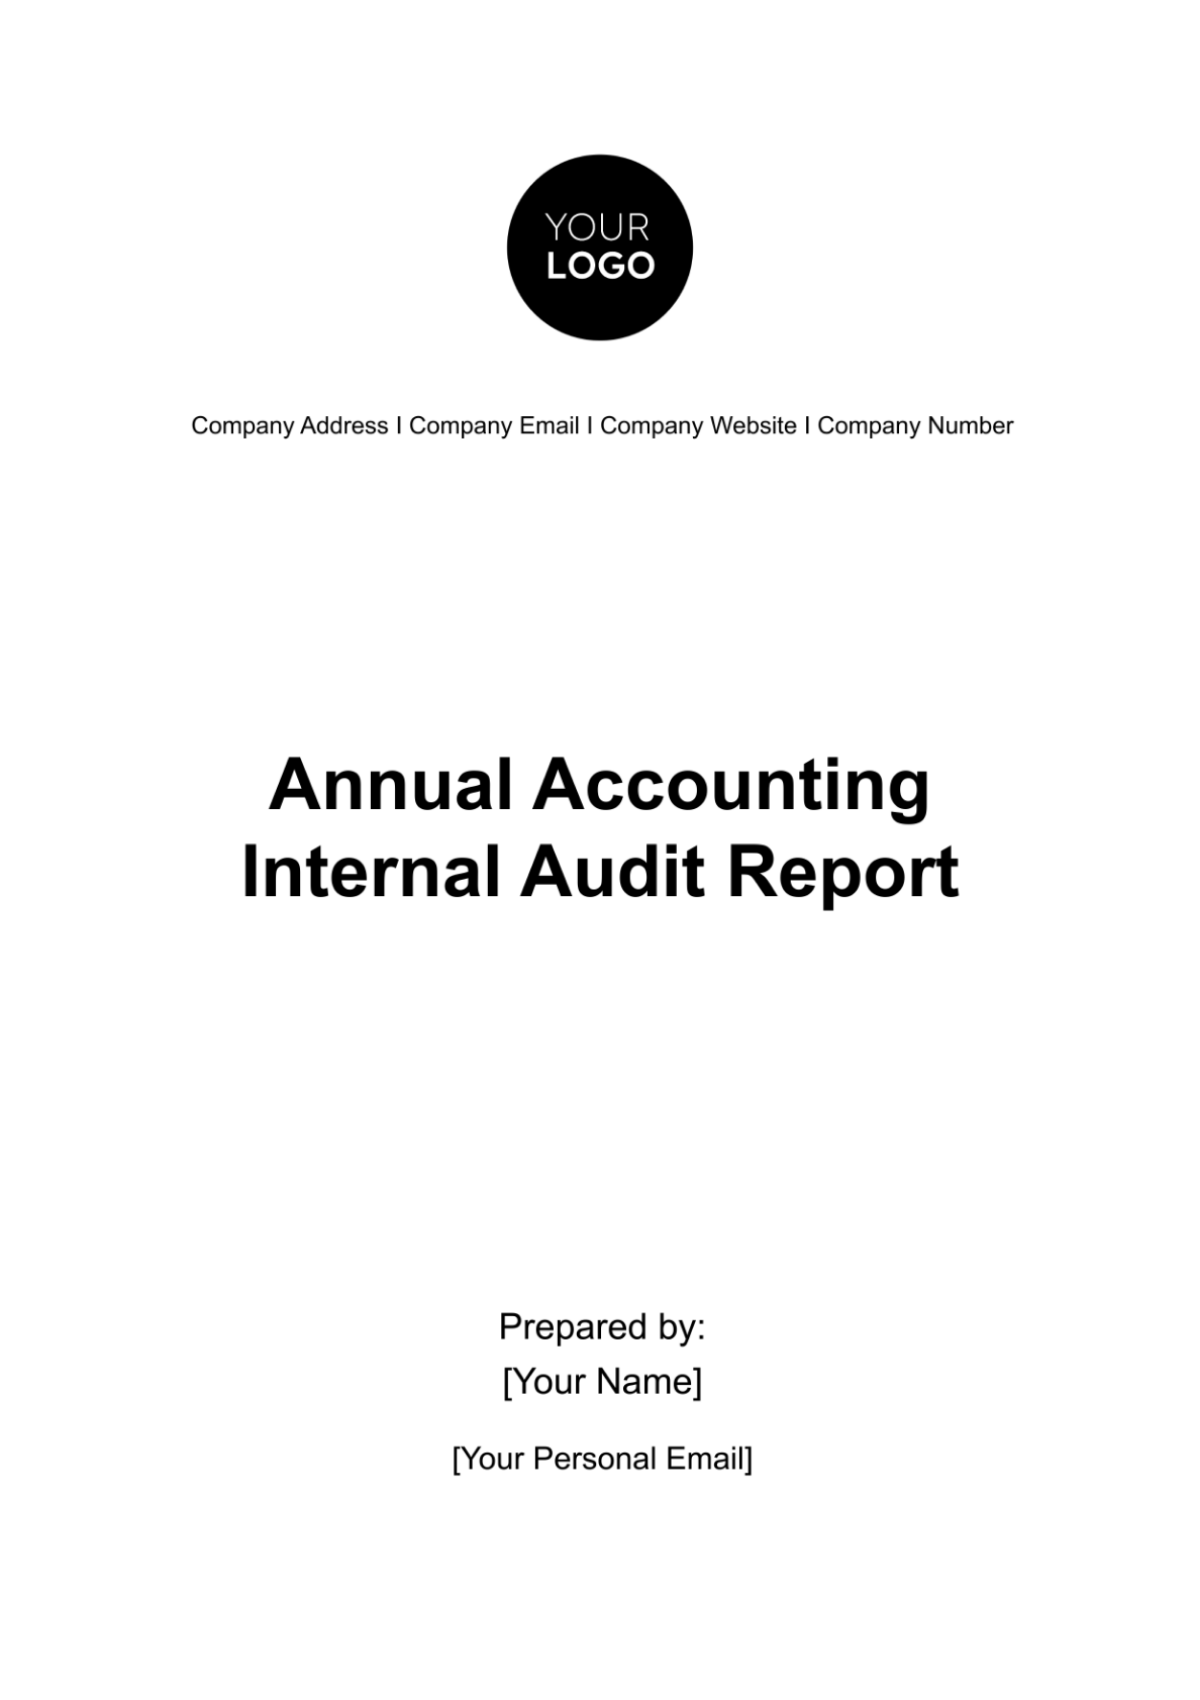 Free Annual Accounting Internal Audit Report Template